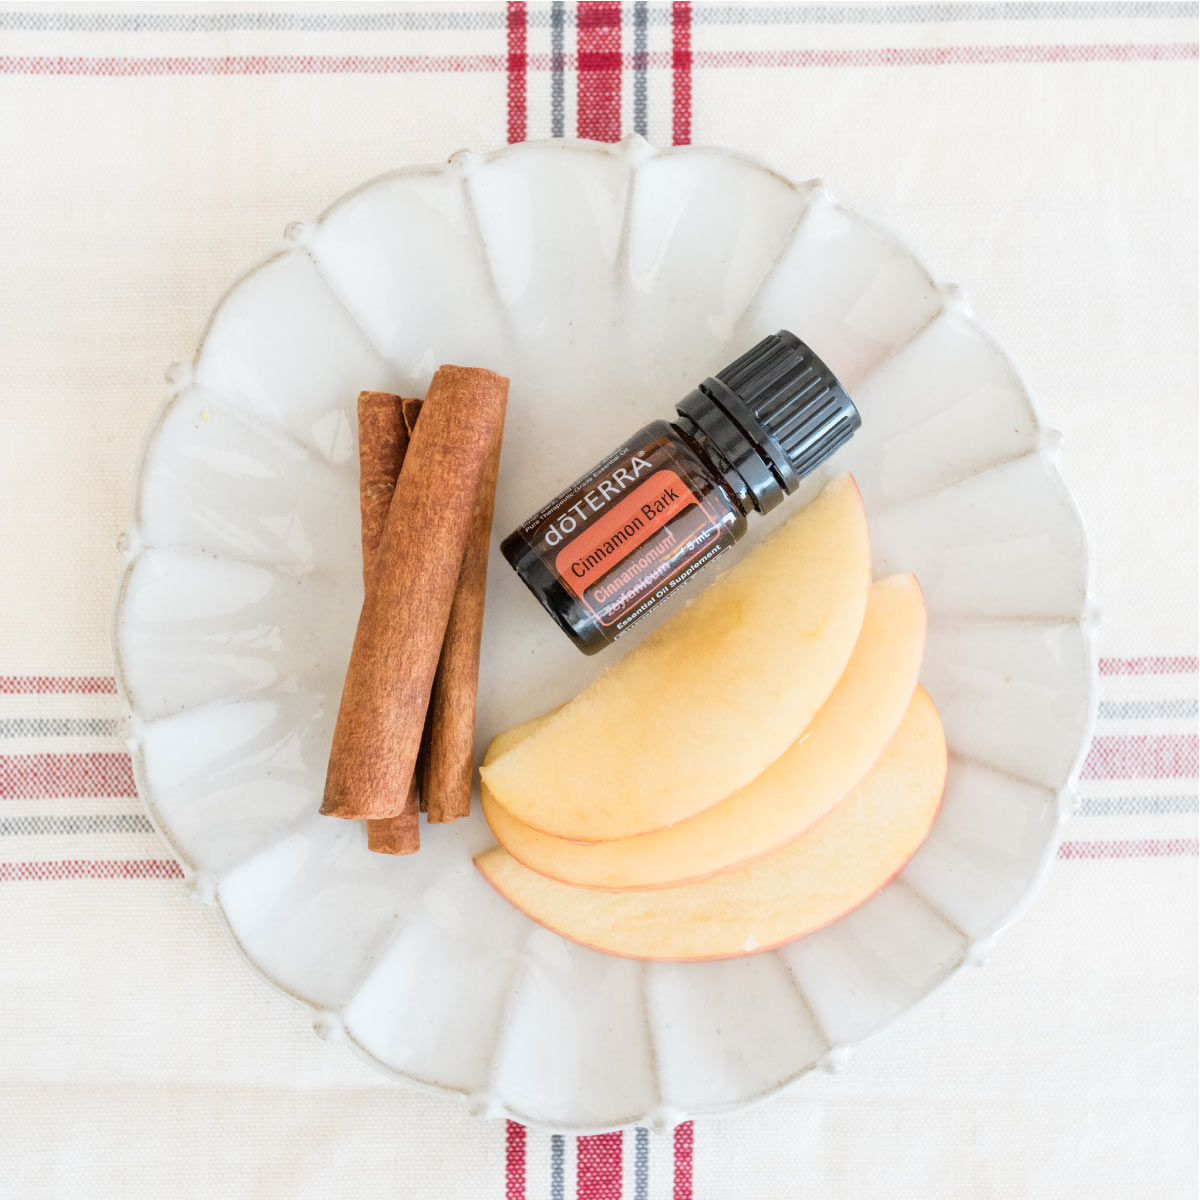 Bottle of Cinnamon essential oil on a plate with apple slices and fresh cinnamon spices. What are the common uses for Cinnamon Bark essential oil? doTERRA Cinnamon oil can be used to support a healthy immune system, for massage, for household cleaning, to add flavor to food, and more.